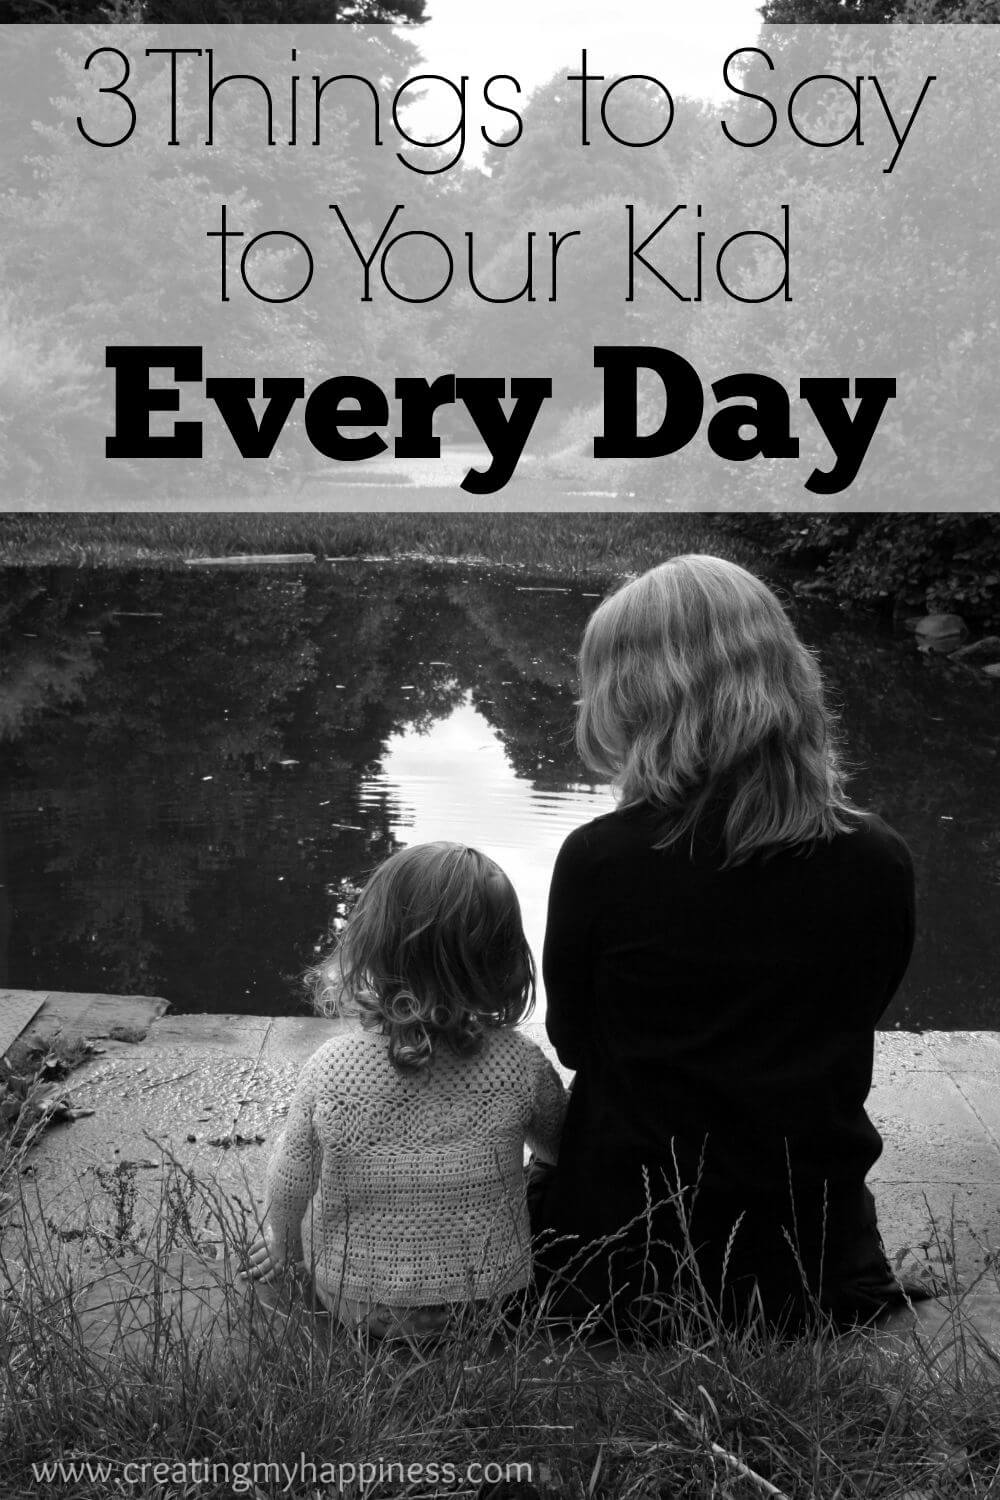 In the every day rush, it's easy to overlook the simplest of needs of our children. There are many more, but here are 3 things to say to your kid every day.